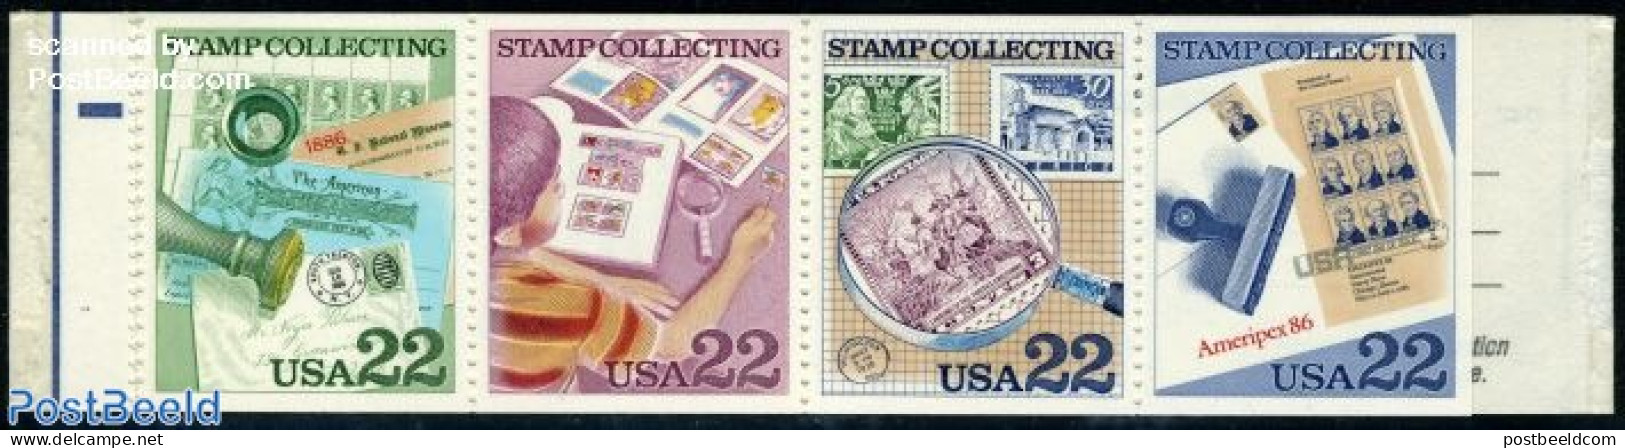 United States Of America 1986 Ameripex Booklet, Mint NH, Philately - Stamp Booklets - Stamps On Stamps - Unused Stamps